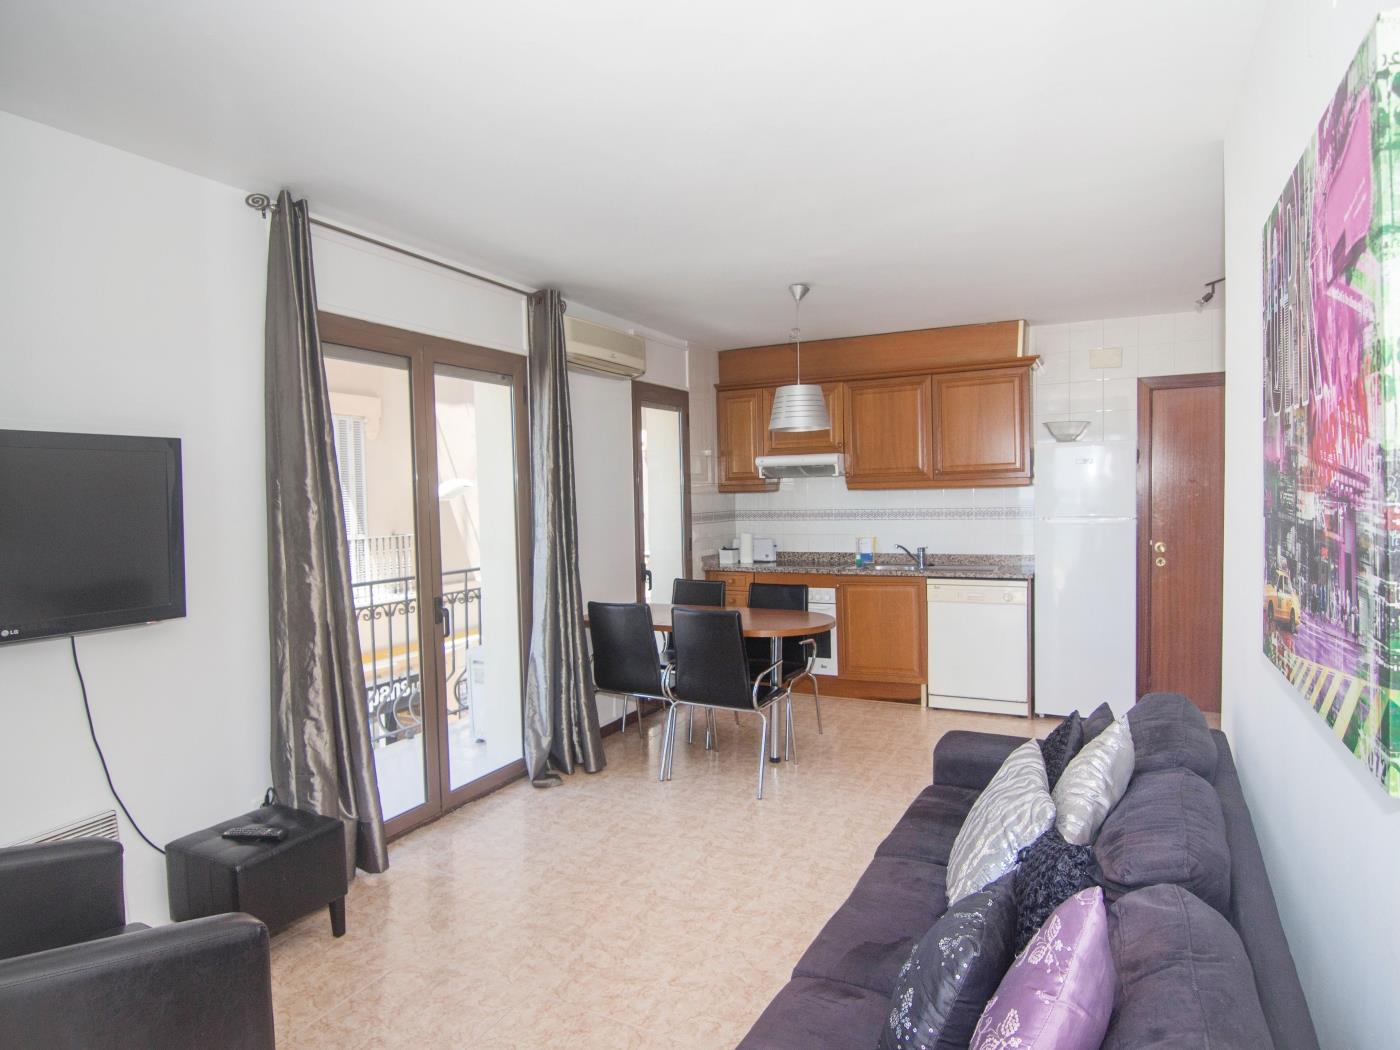 QUEEN BY BLAUSITGES Beach front location and fantastic views of Sitges. in SITGES